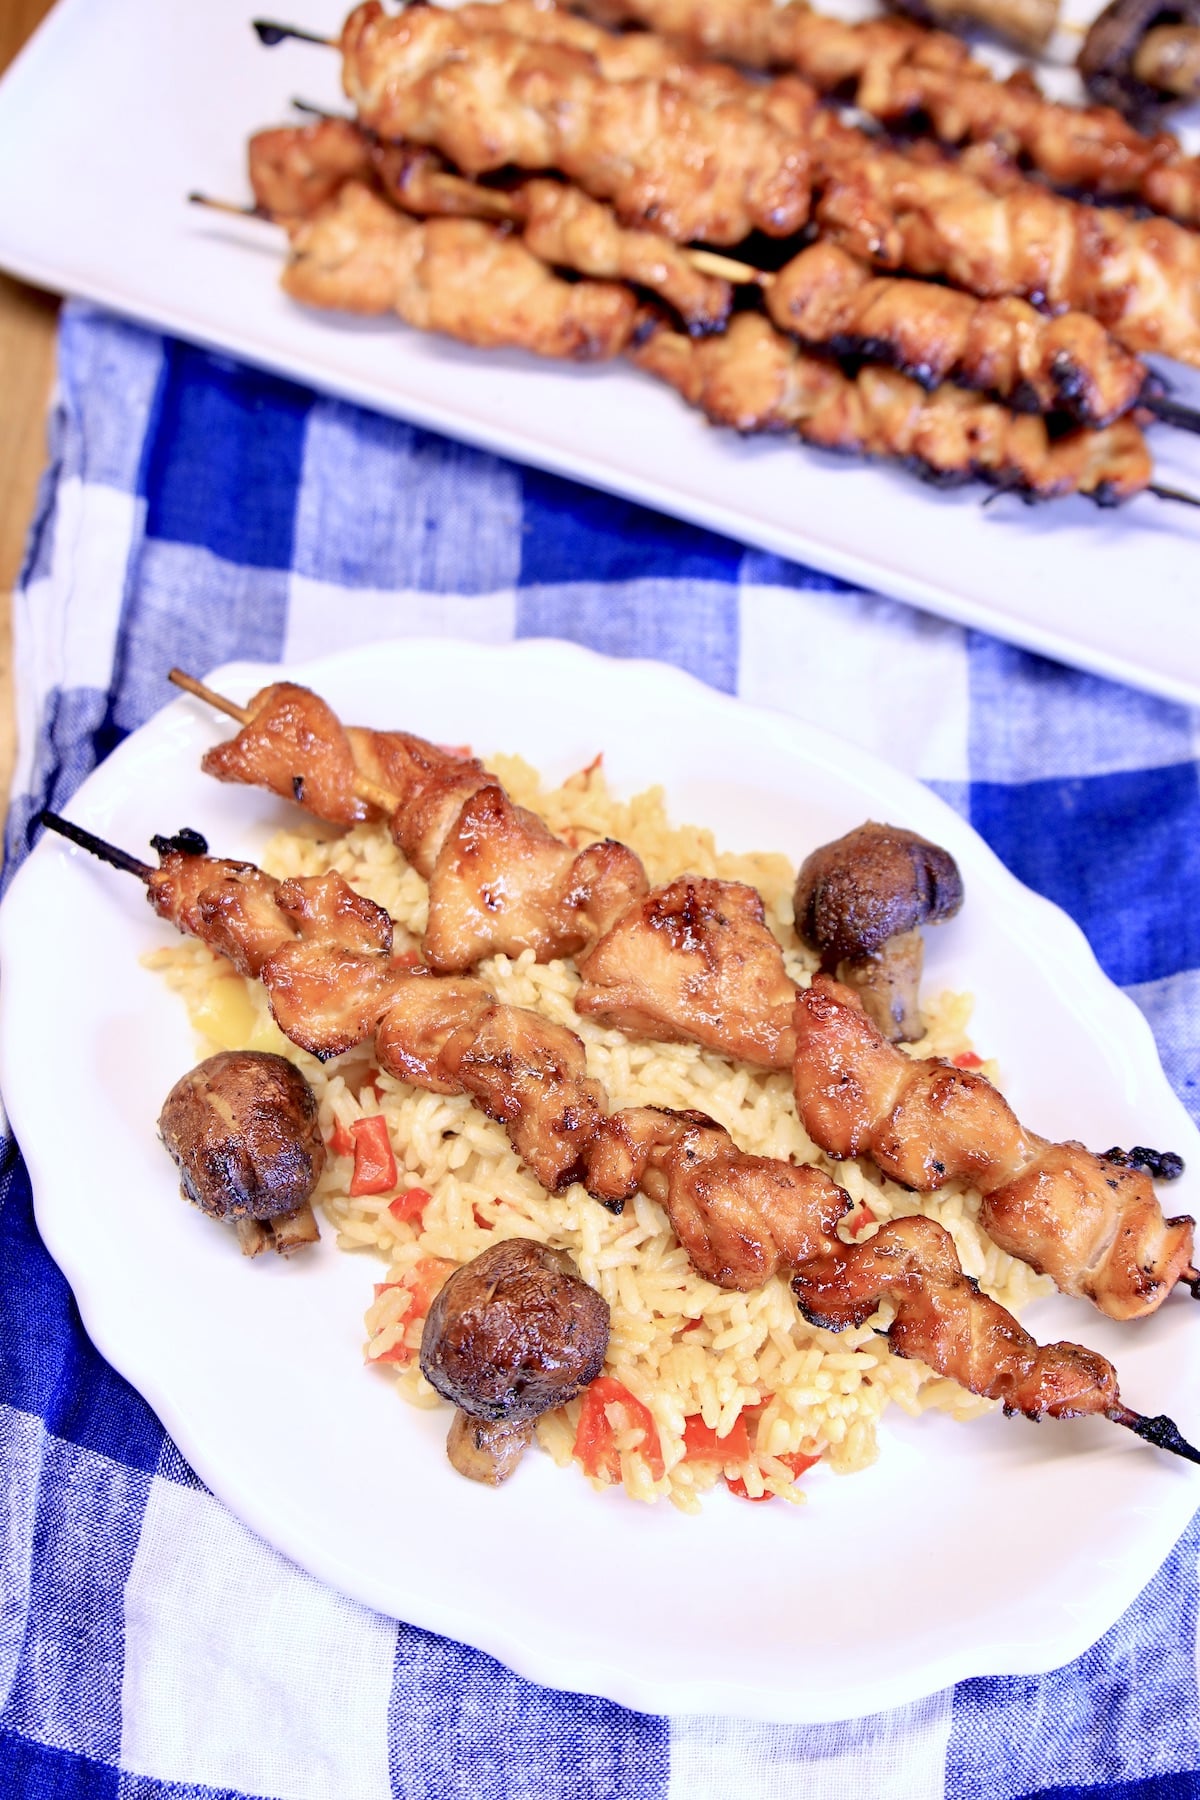 Chicken teriyaki skewers on a plate with mushrooms and rice.